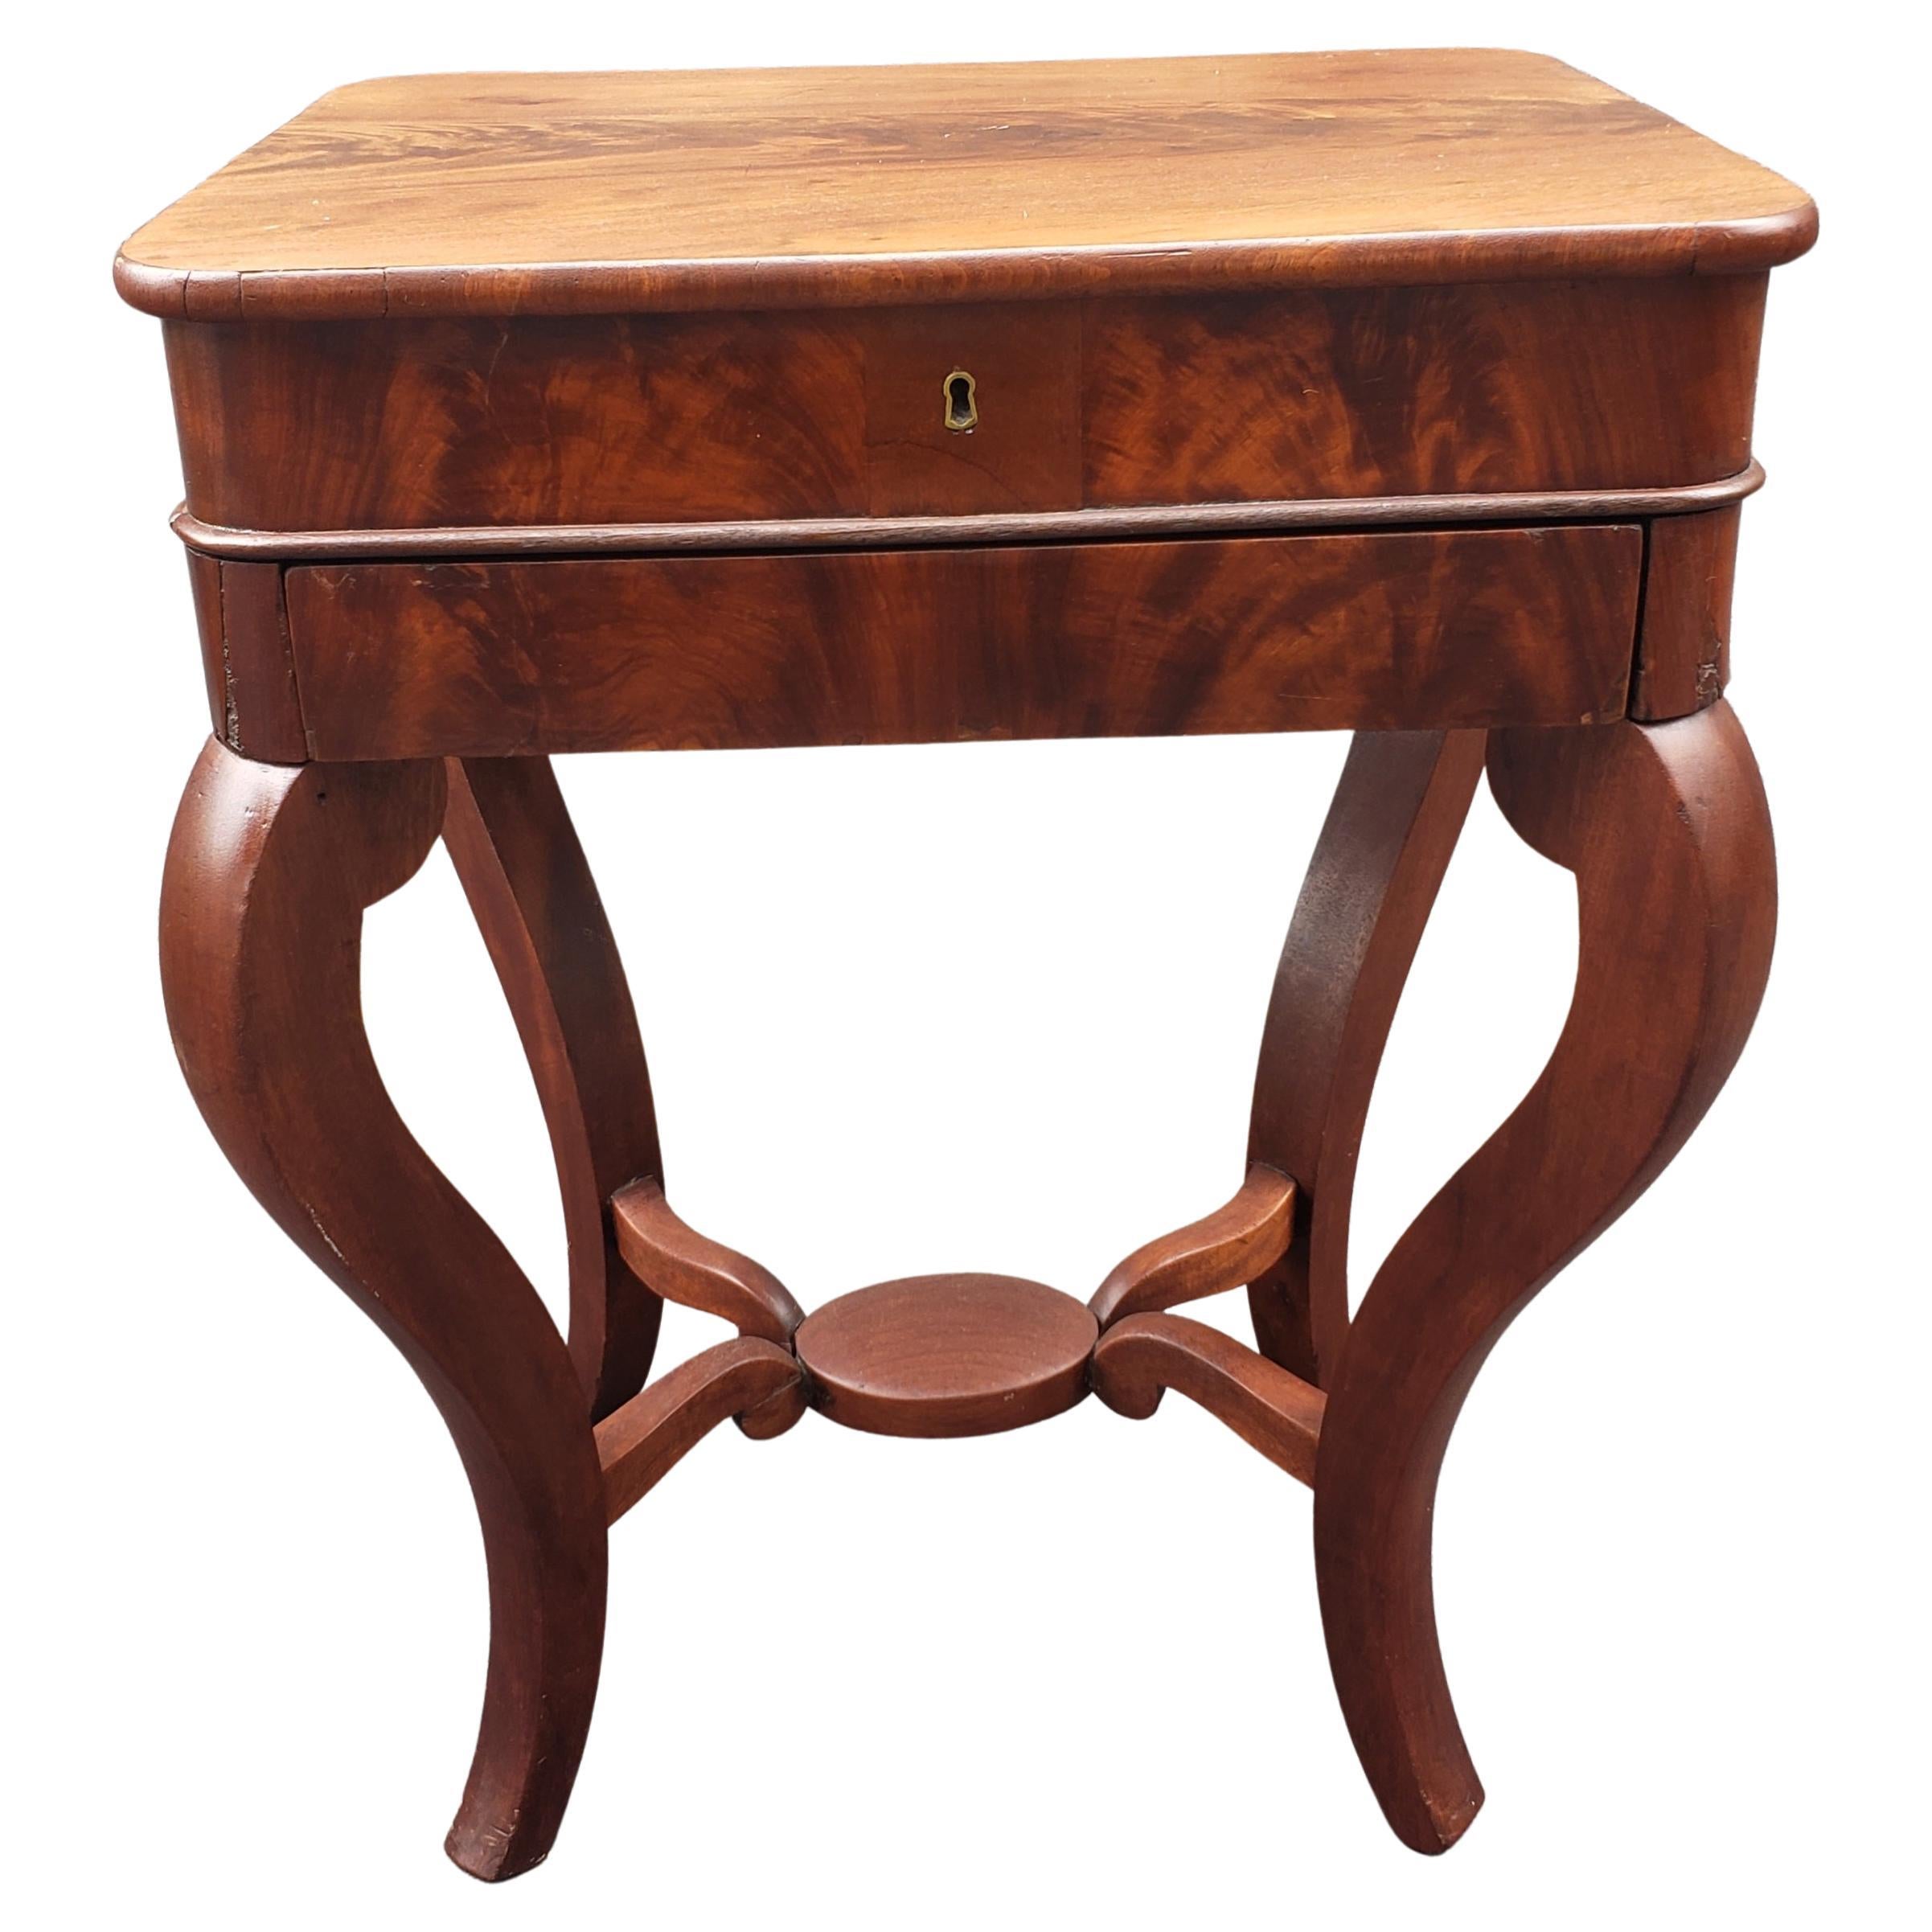 19th century American Empire One-Drawer Flame Mahogany Sewing or Work Table.
Measures 20